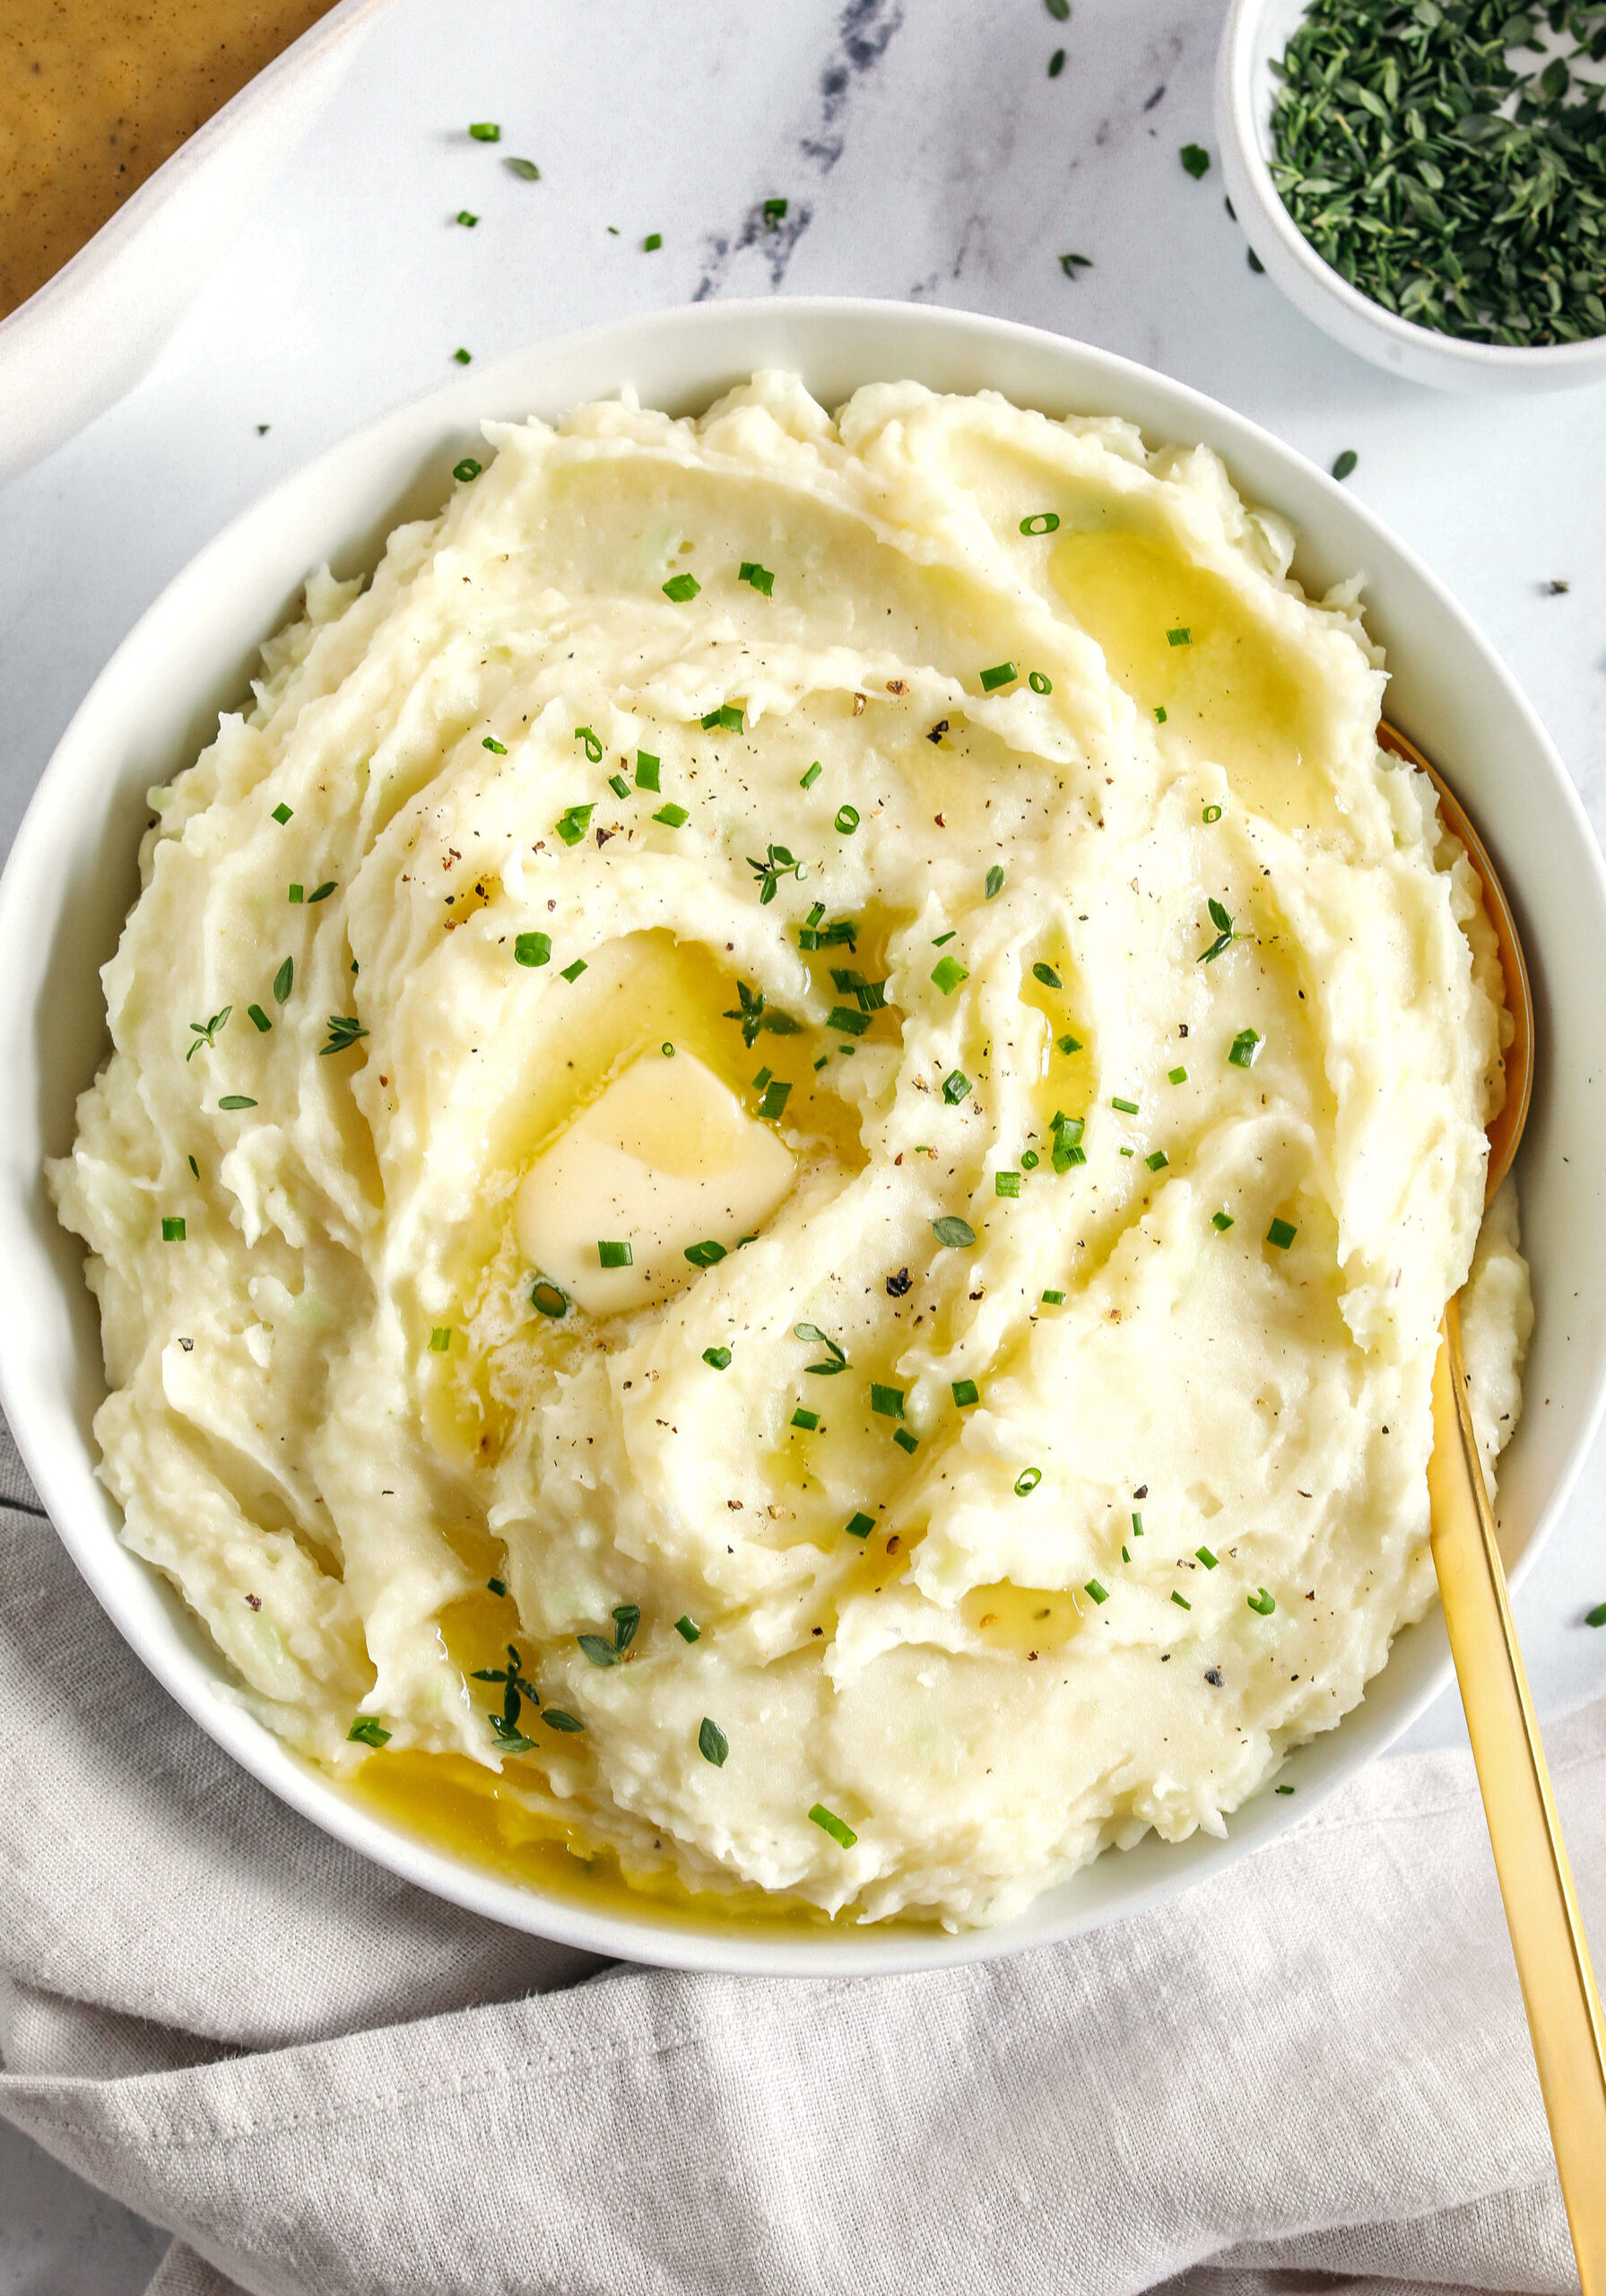 These Healthy Mashed Potatoes are creamy, absolutely delicious and made lighter with Greek yogurt, almond milk and a whole head of cauliflower!  The perfect side dish for your holiday table or weeknight dinner.